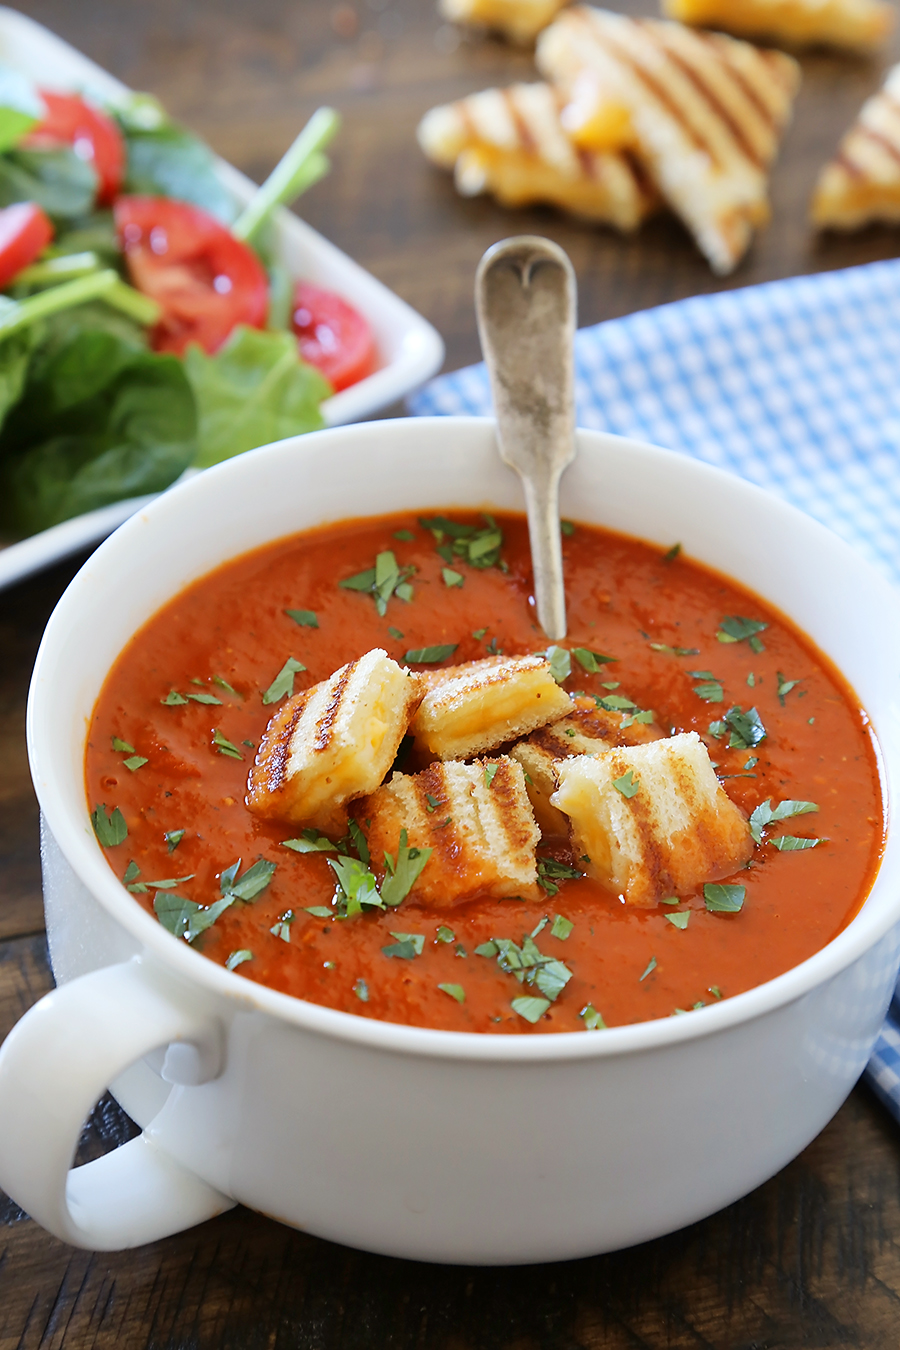 Tomato-Basil Soup with Grilled Cheese Croutons - Easy, healthy and hearty! Top with crispy, gooey grilled cheese croutons and serve with a green salad. thecomfortofcooking.com